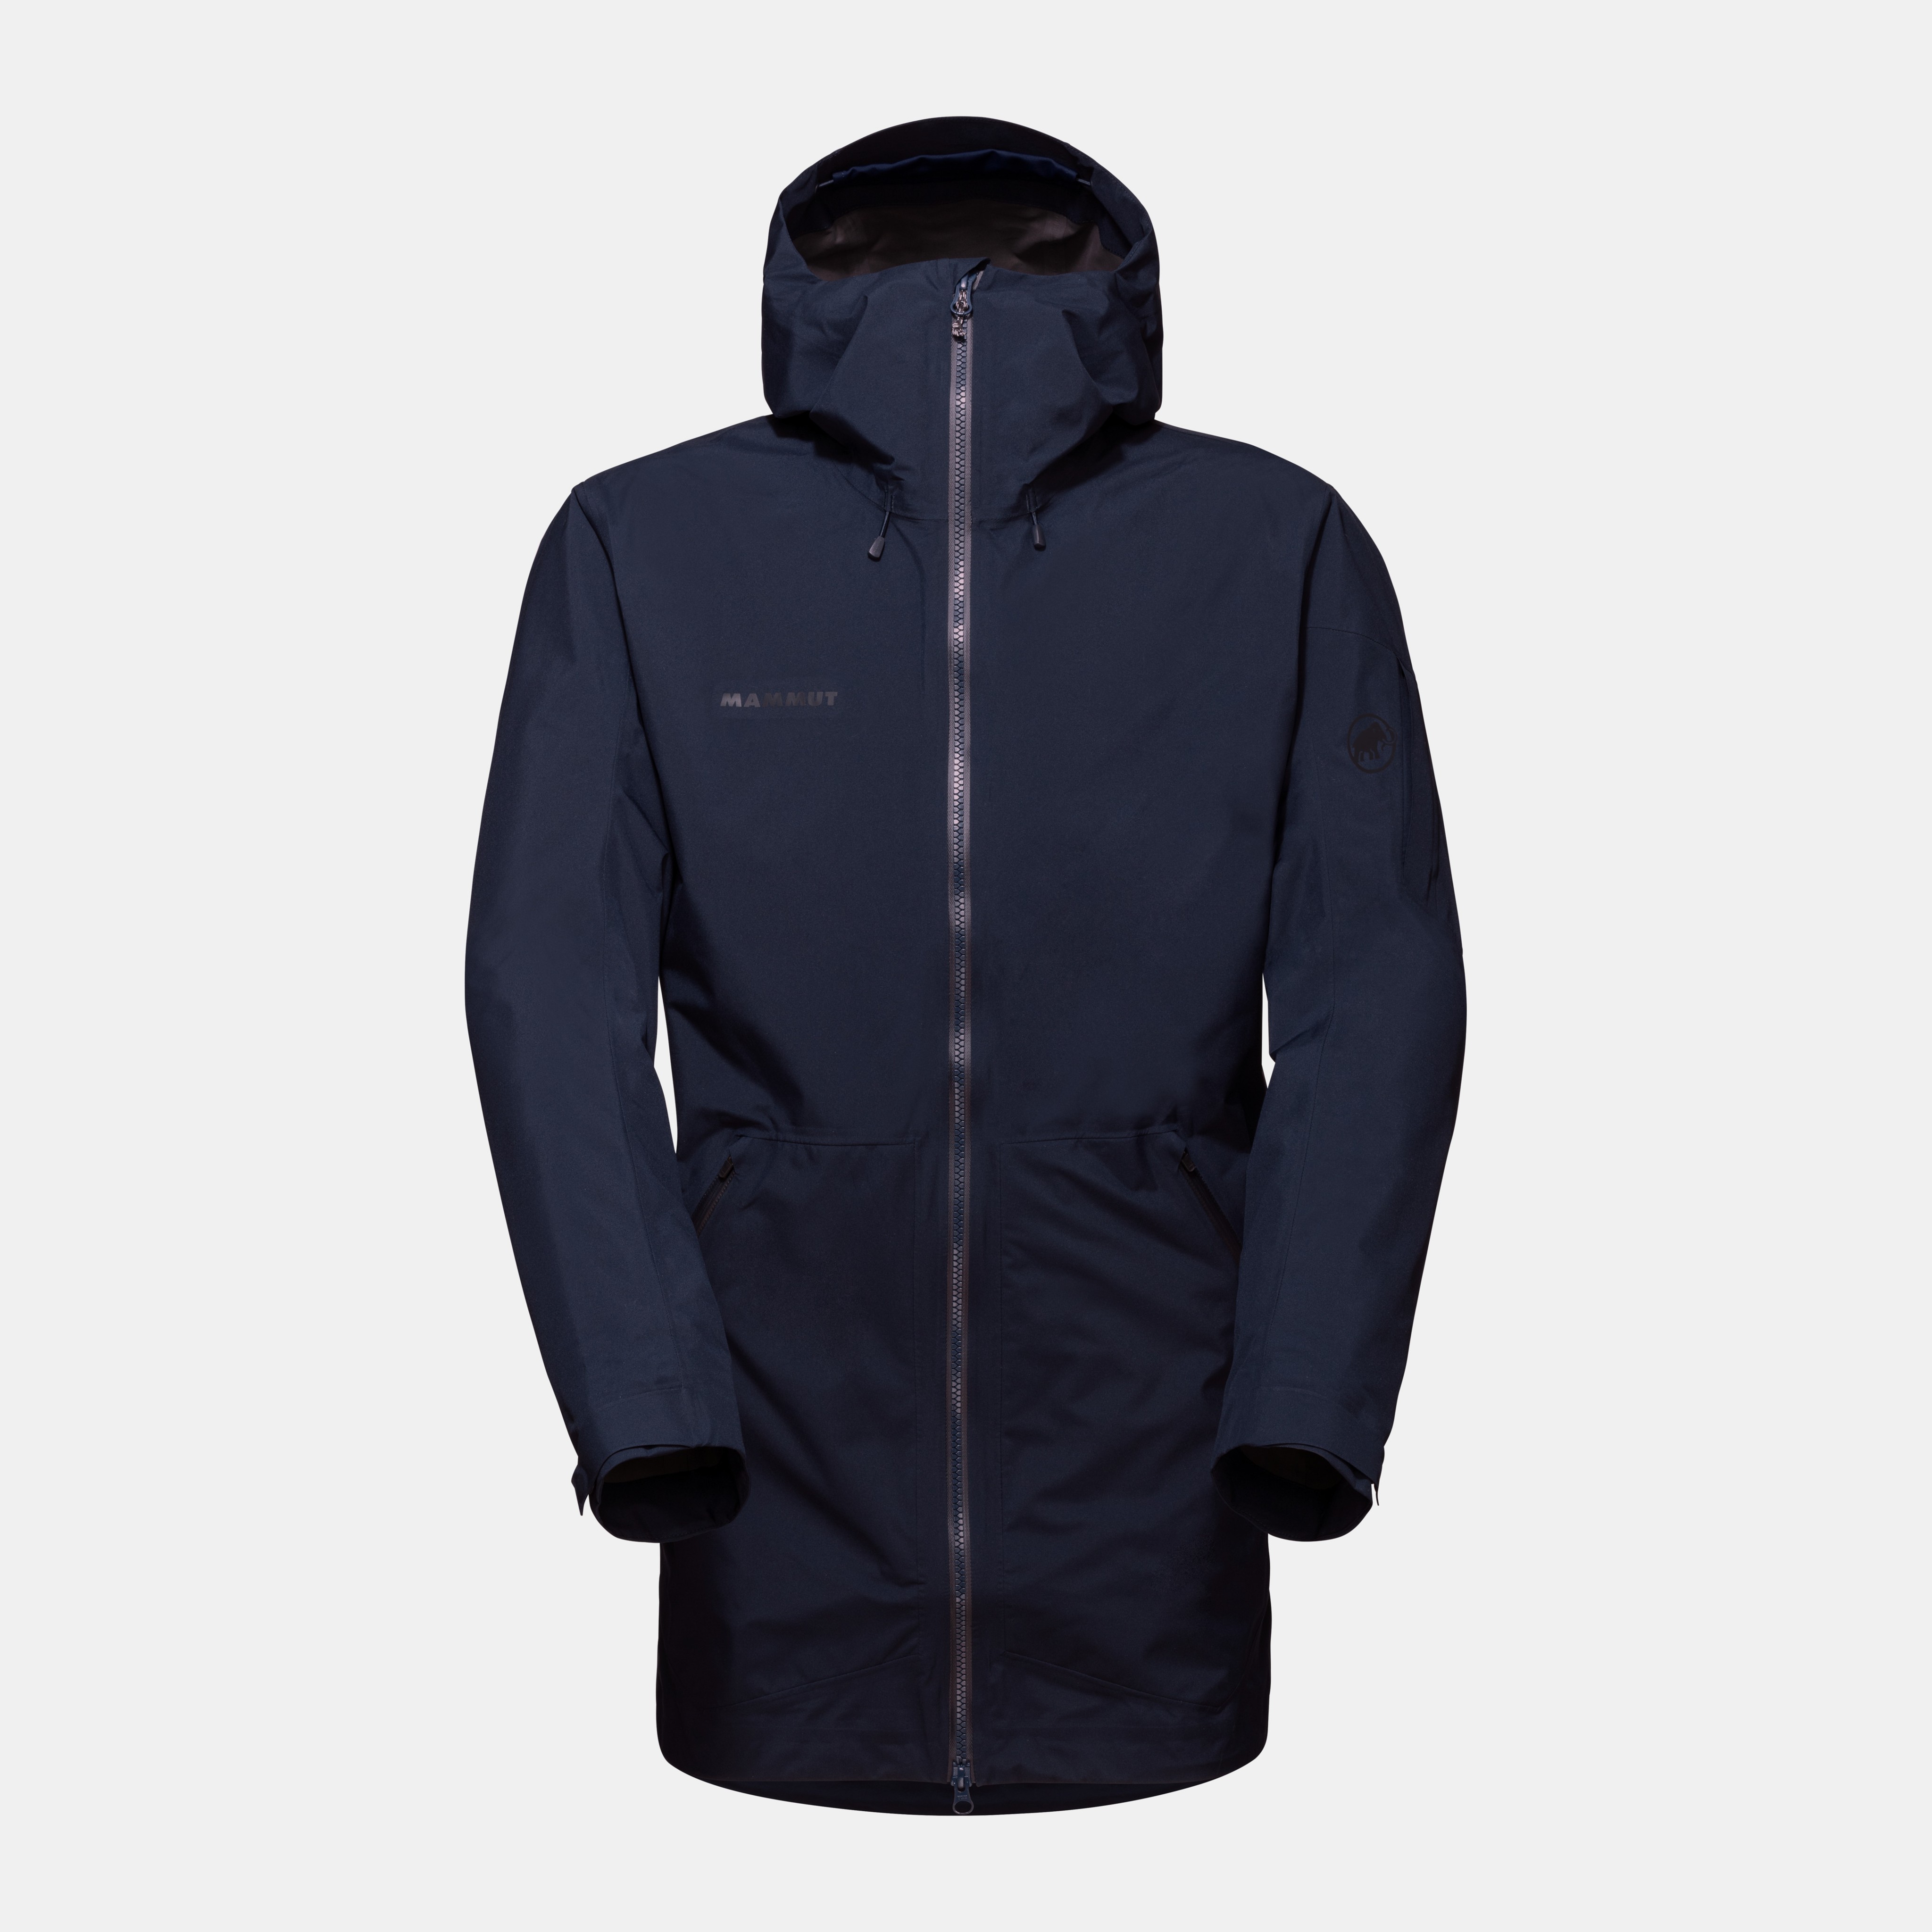 Seon Pac HS Hooded Jacket Men product image